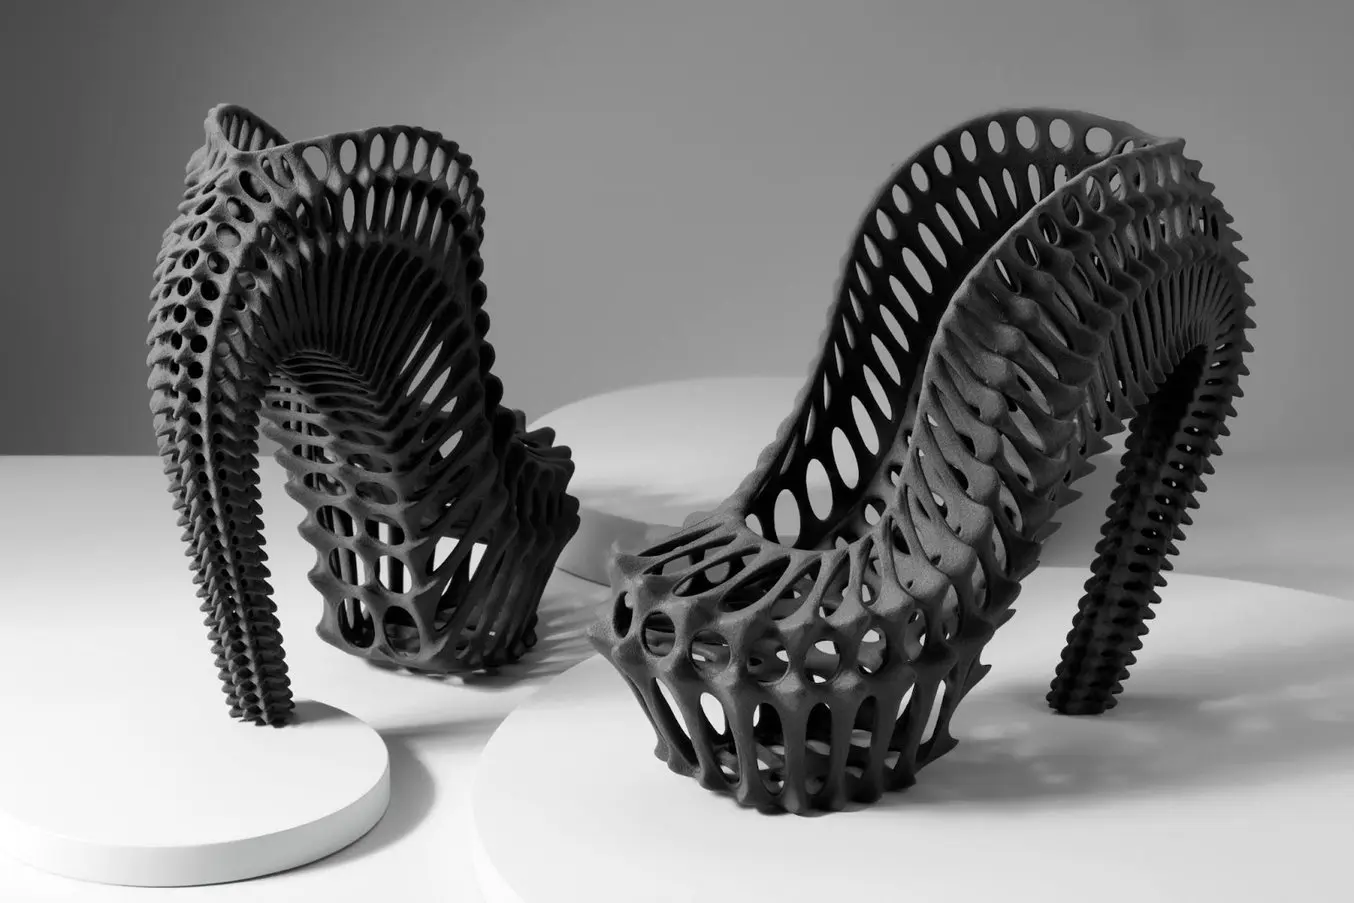 SLS 3D printing is ideal for intricate models and complex geometries. Part printed on a Fuse 1 SLS 3D printer.